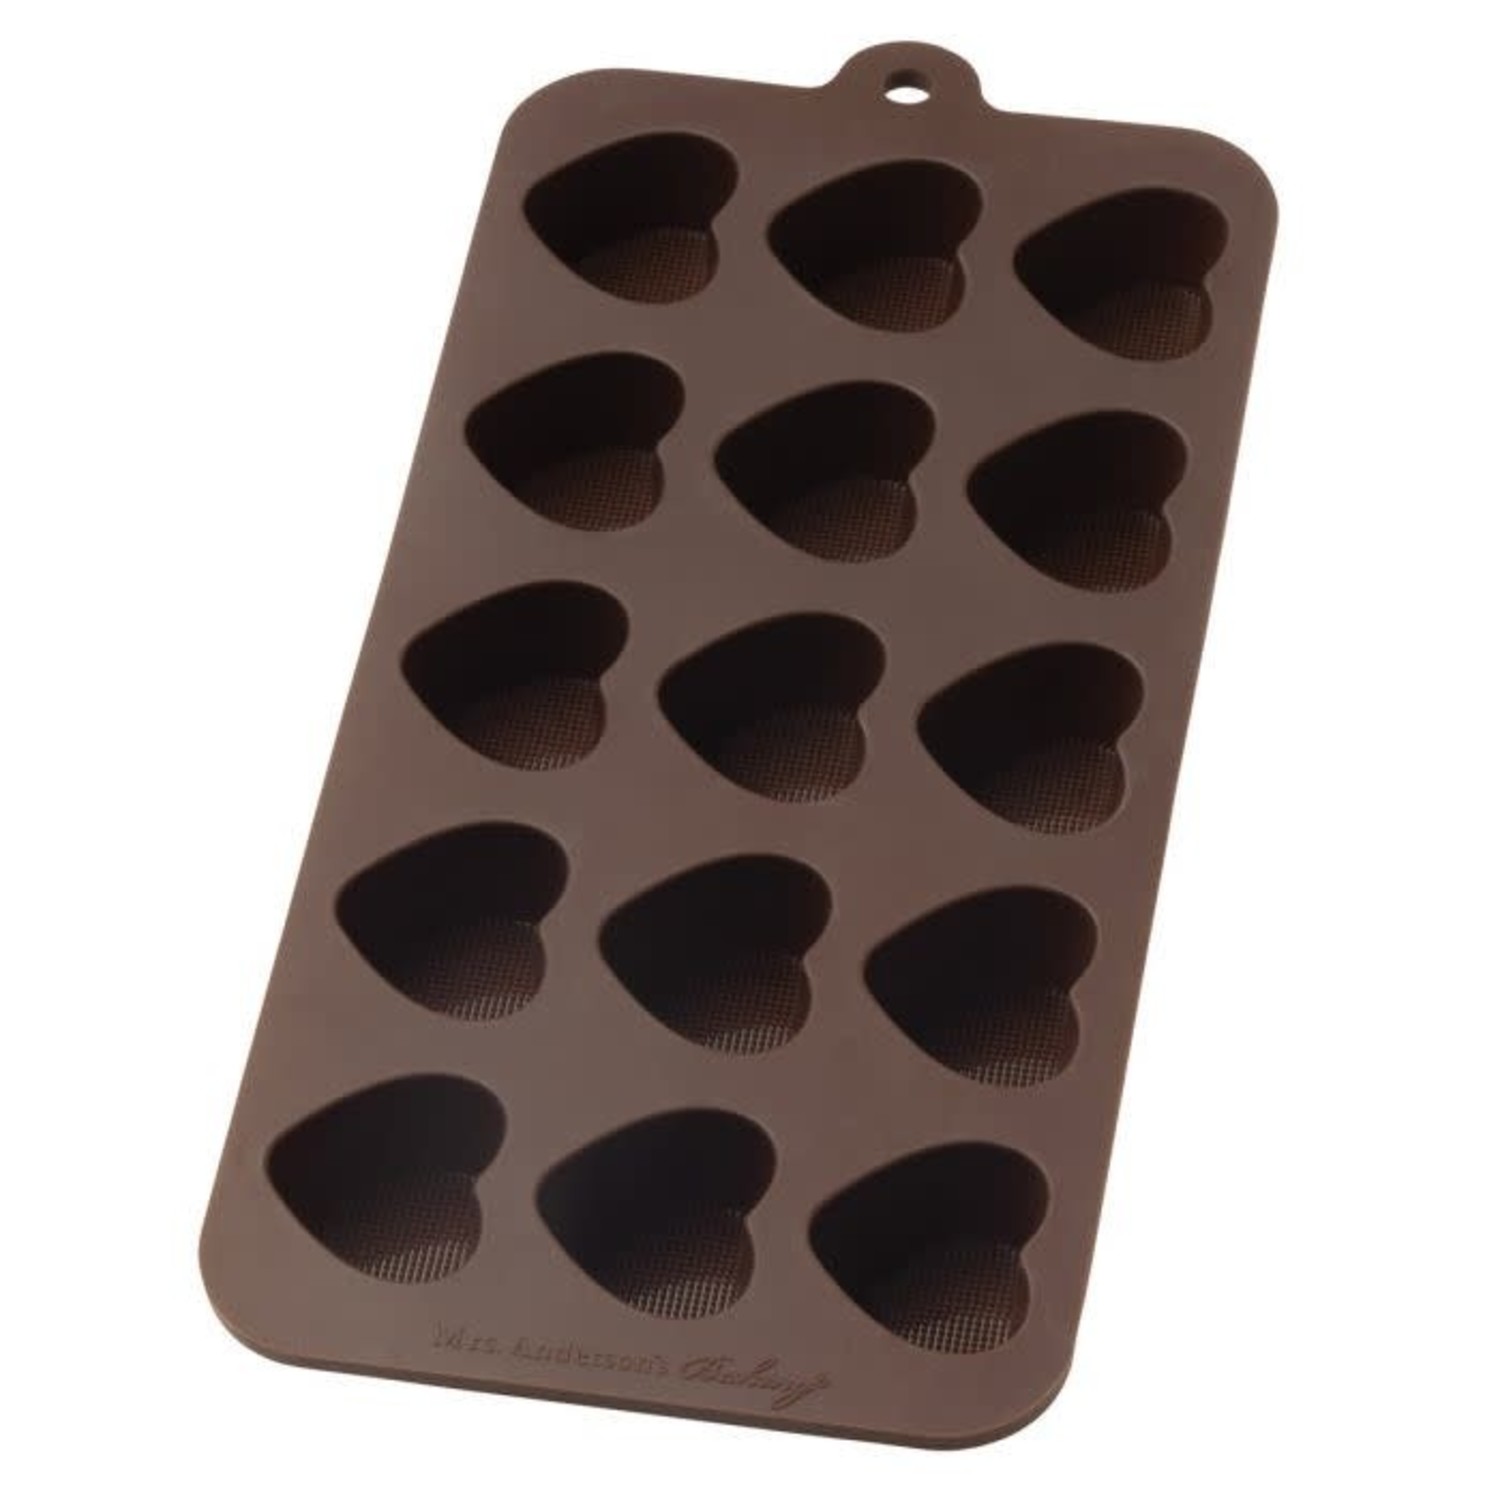 Mrs. Anderson's Baking Heart Cutter with Storage Container, Set of 5